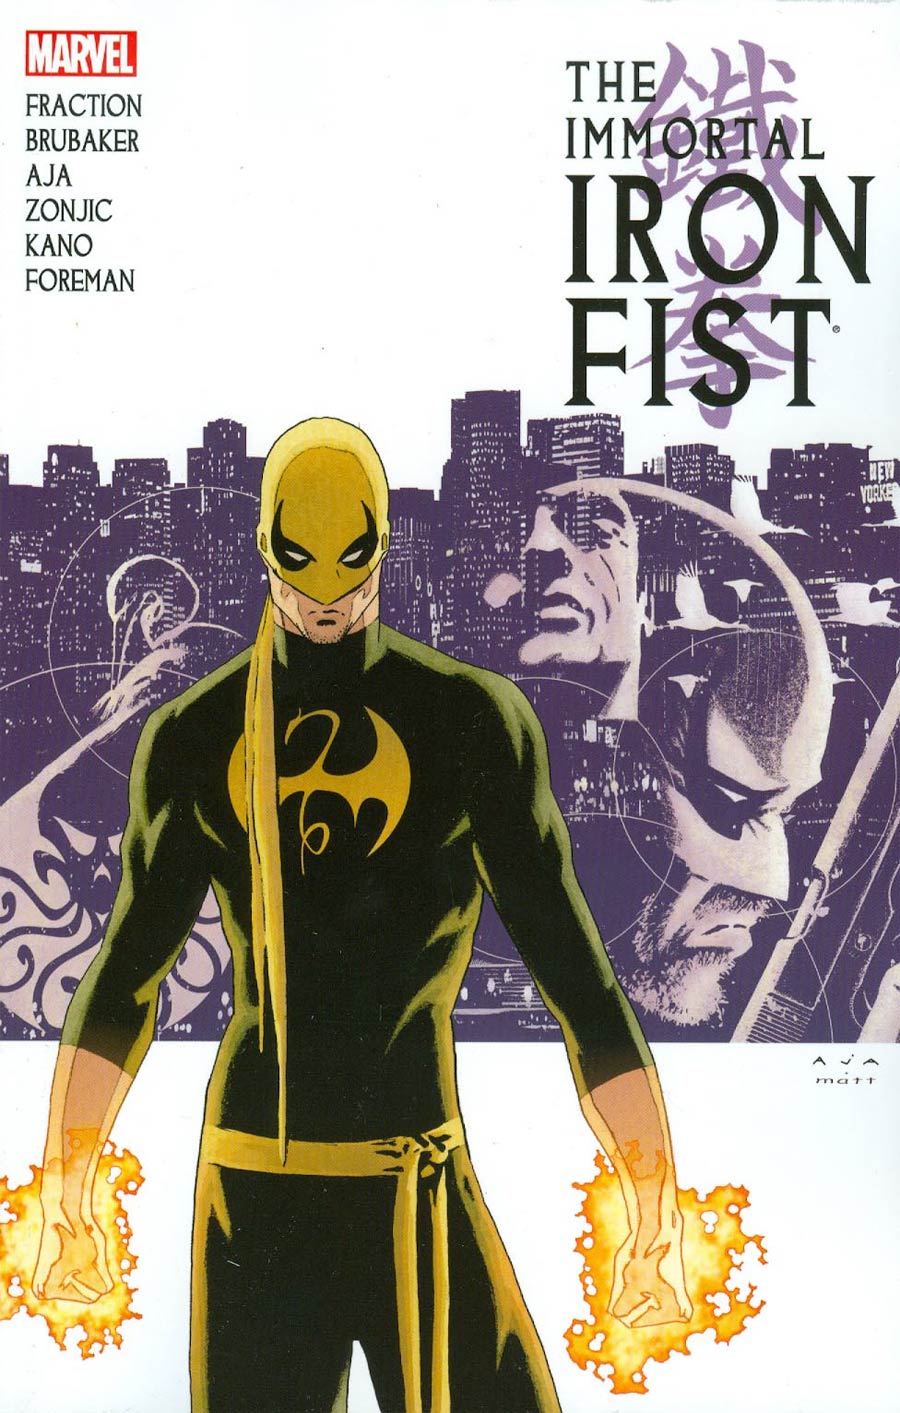 Immortal Iron Fist Complete Collection Vol 1 TP